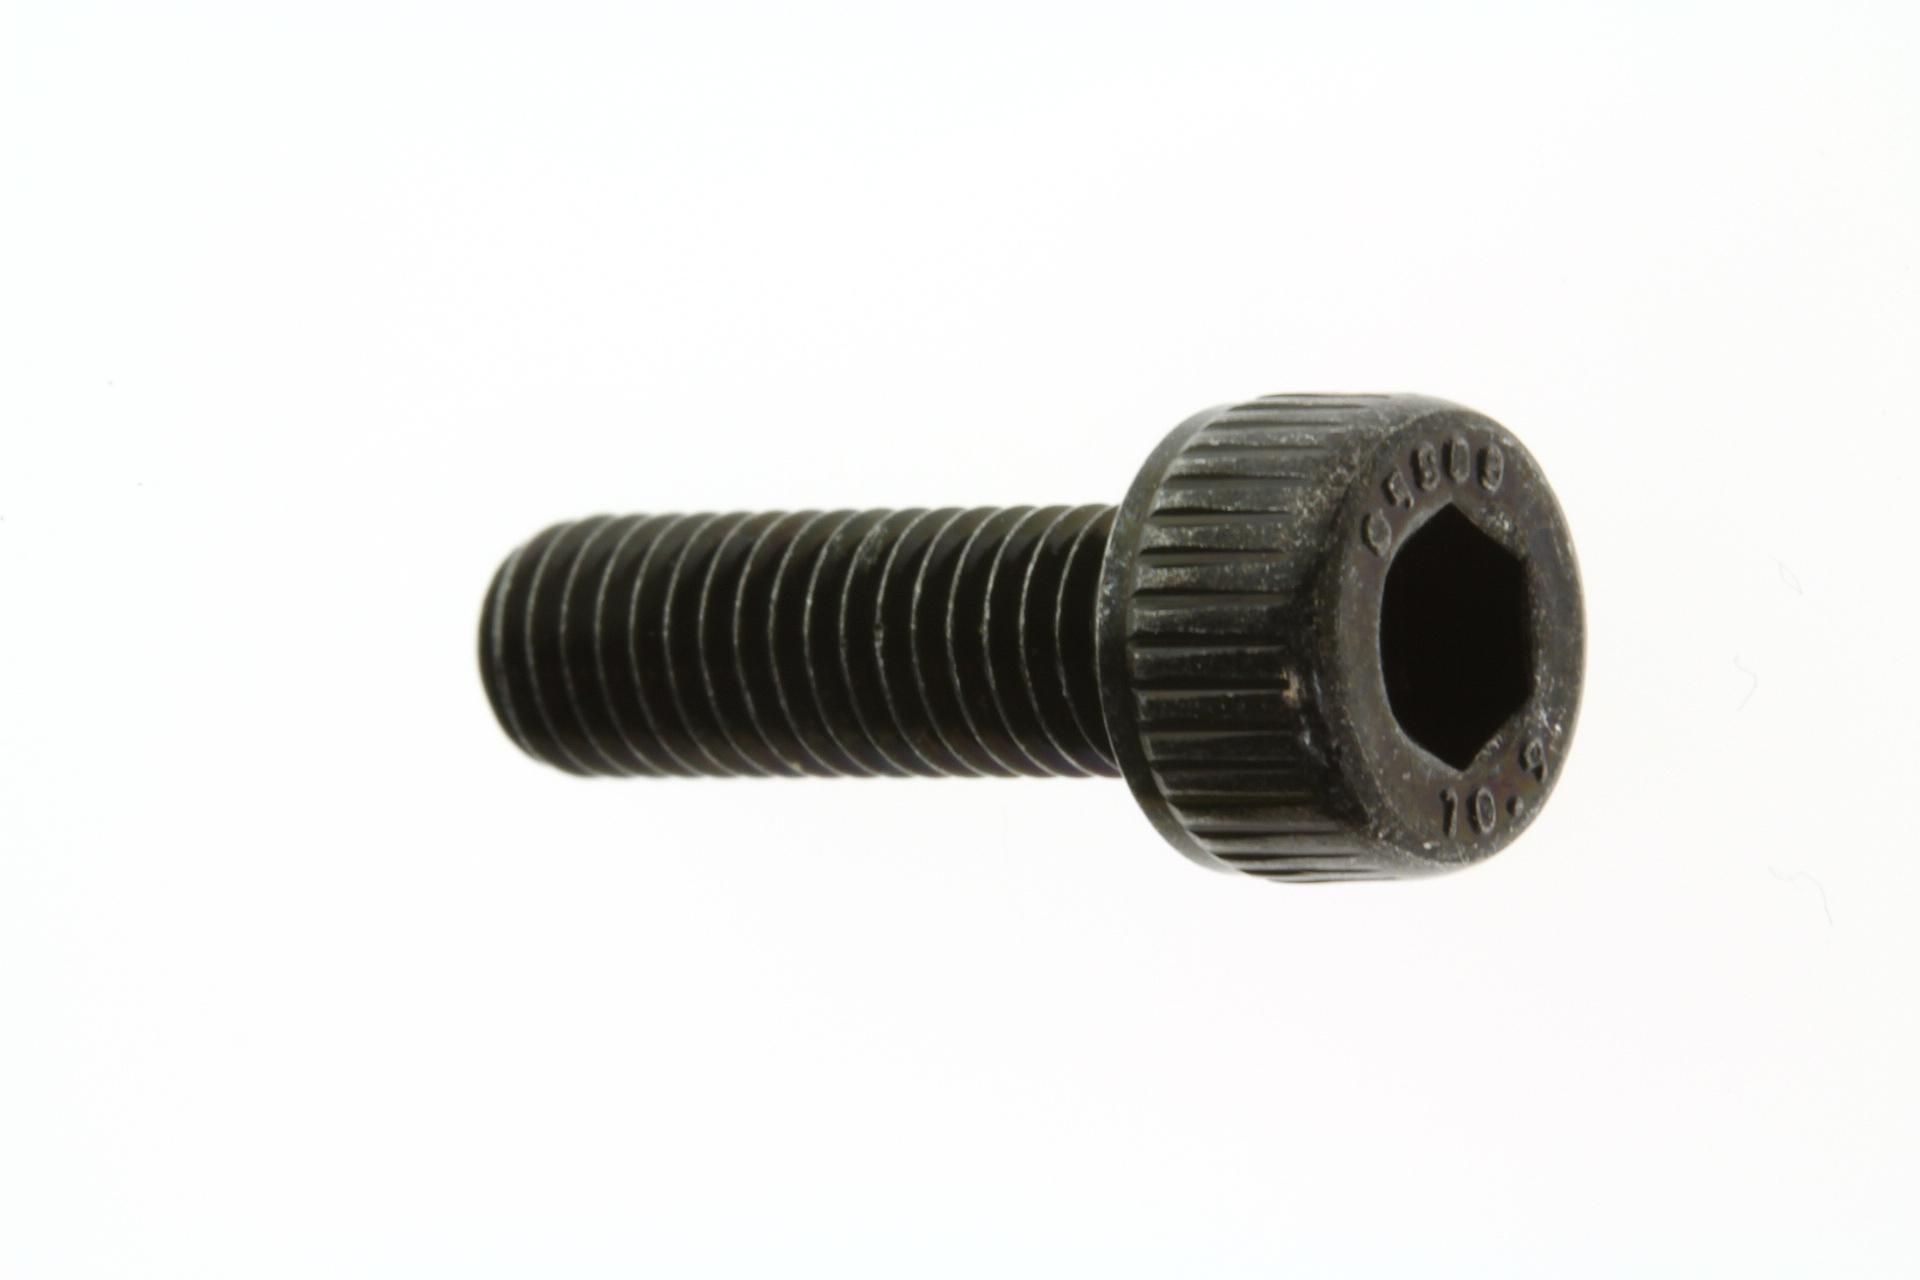 91312-05016-00 Superseded by 91317-05016-00 - BOLT, SOCKET